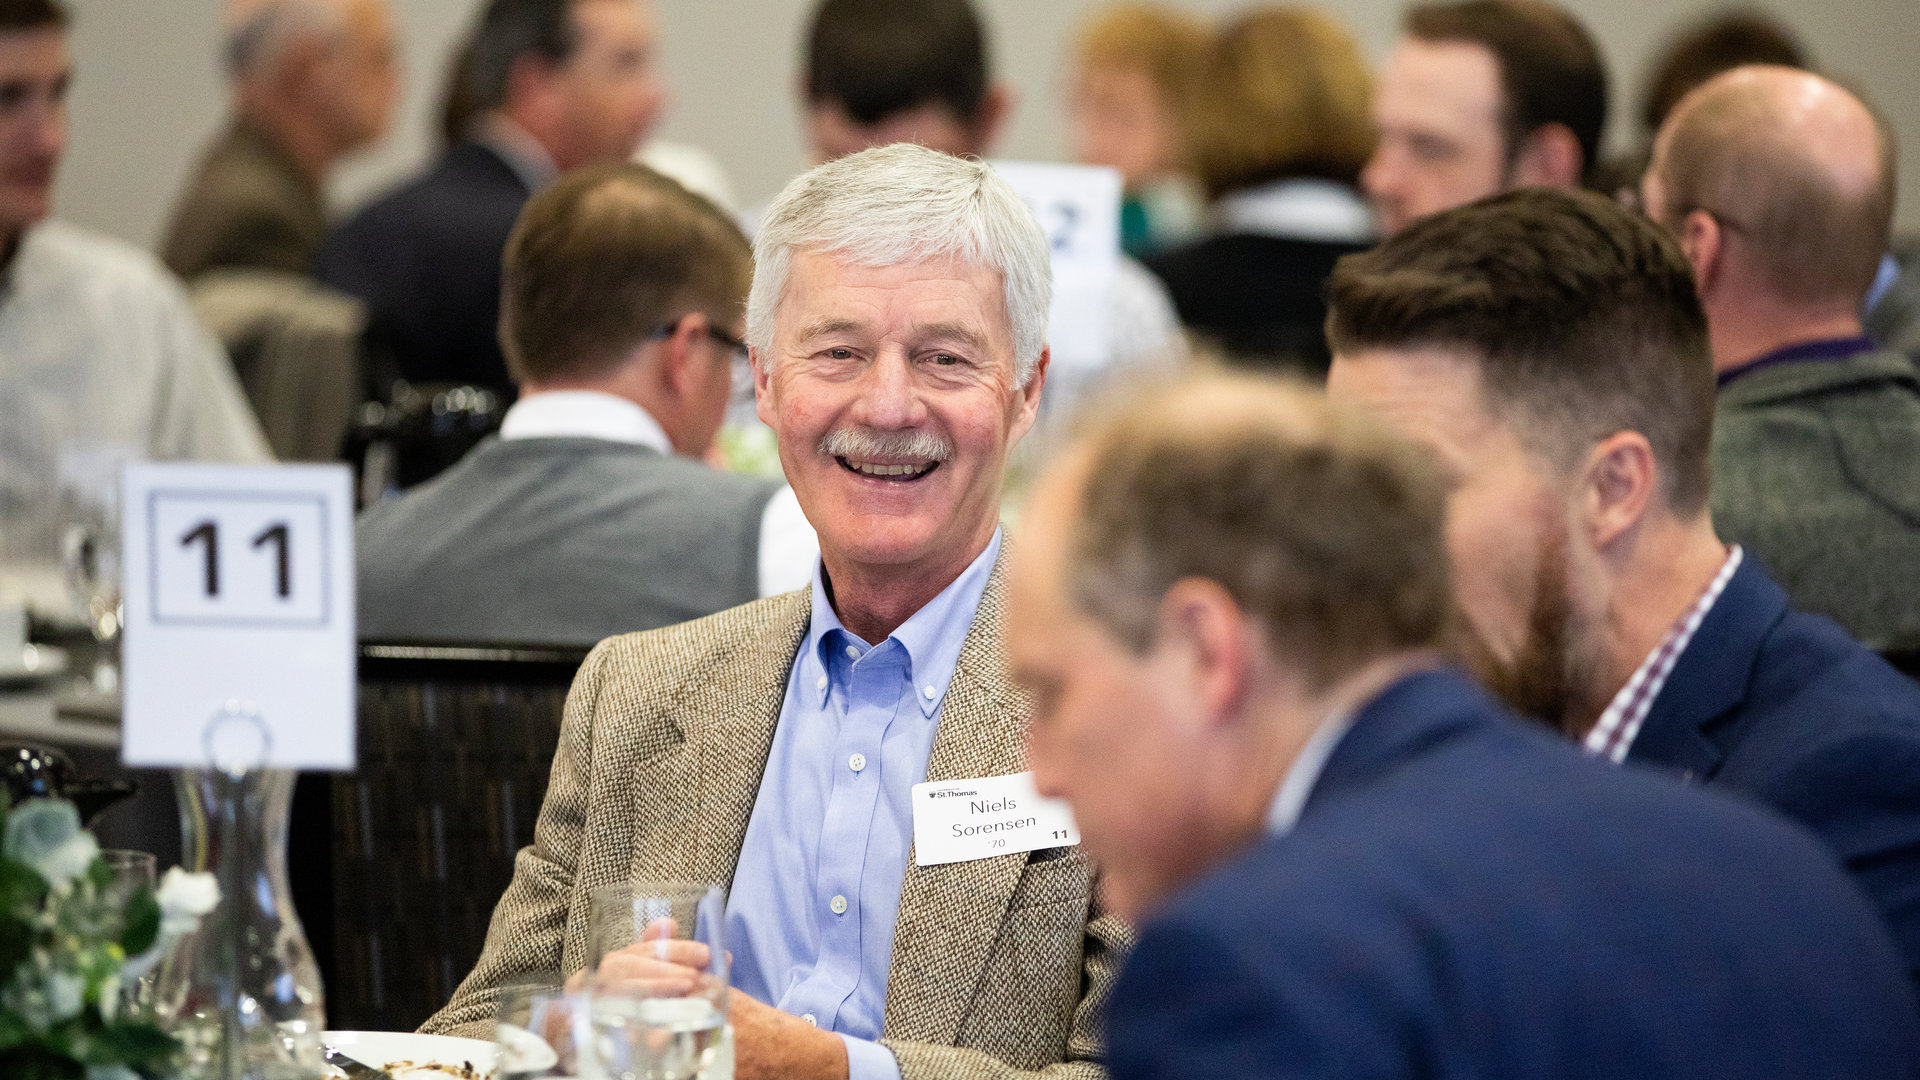 Man smiles at an event with alumni.